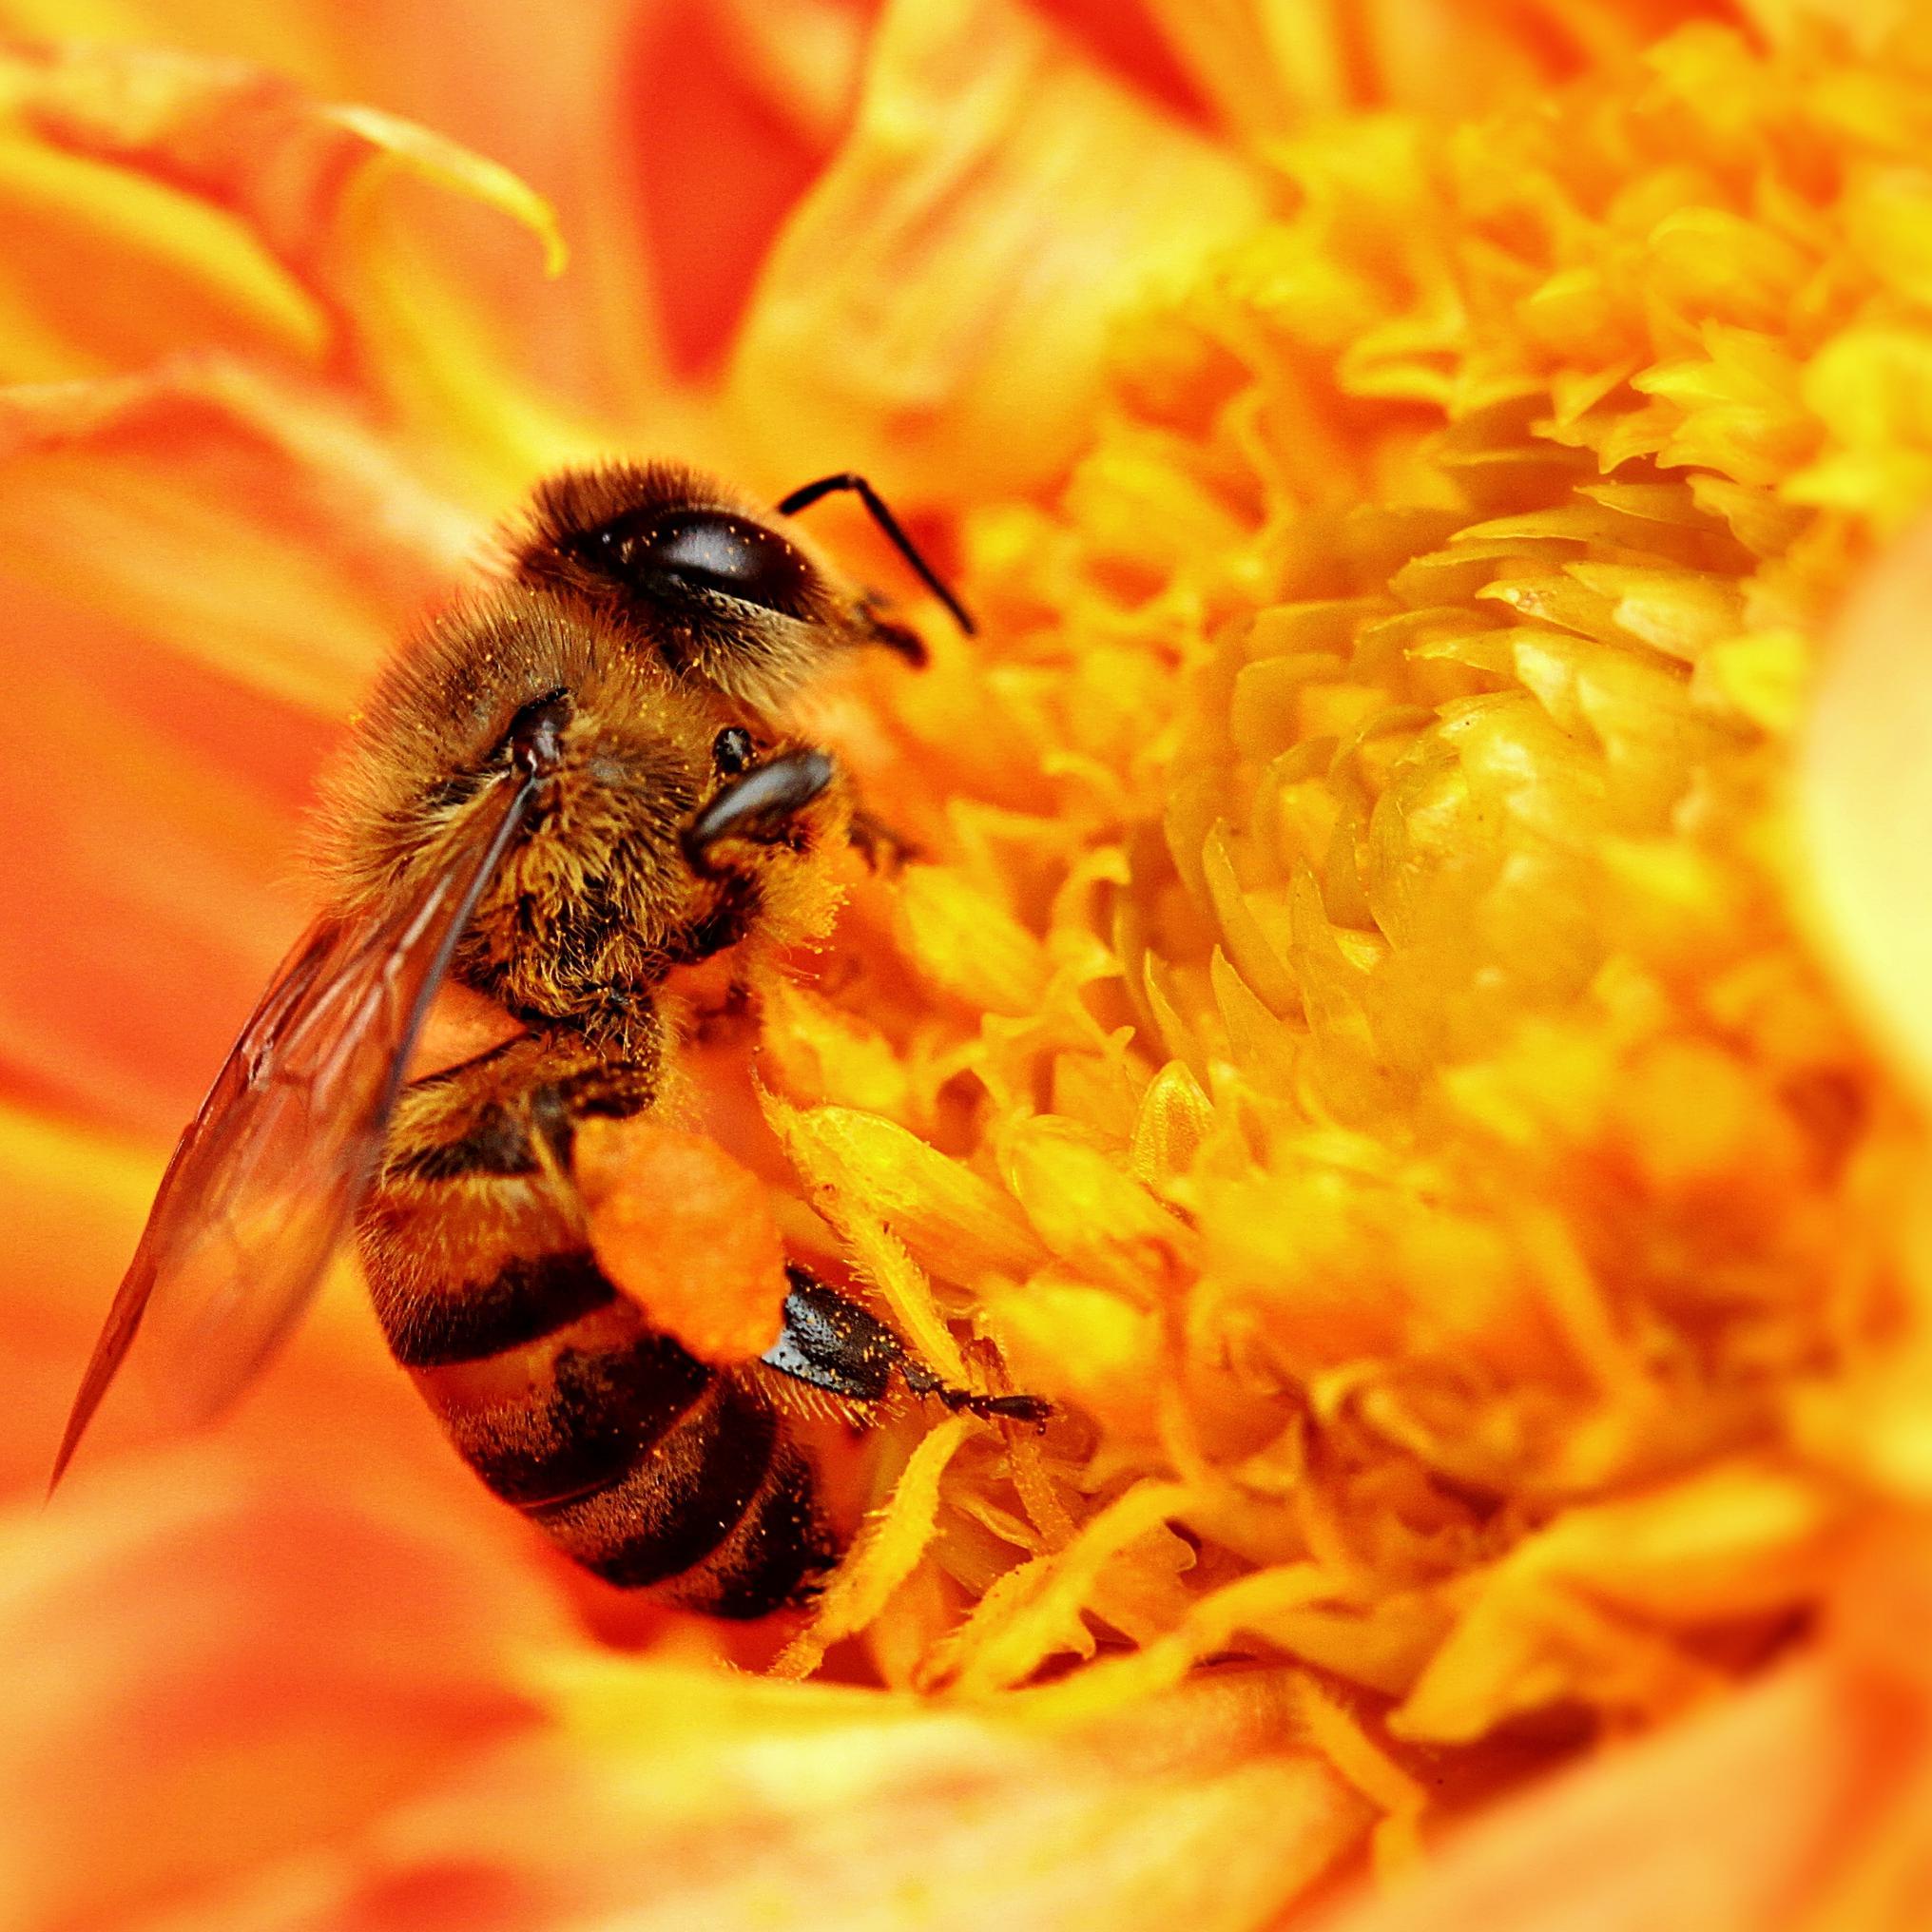 Bees are in trouble.  Lets do whatever we can to help them out.